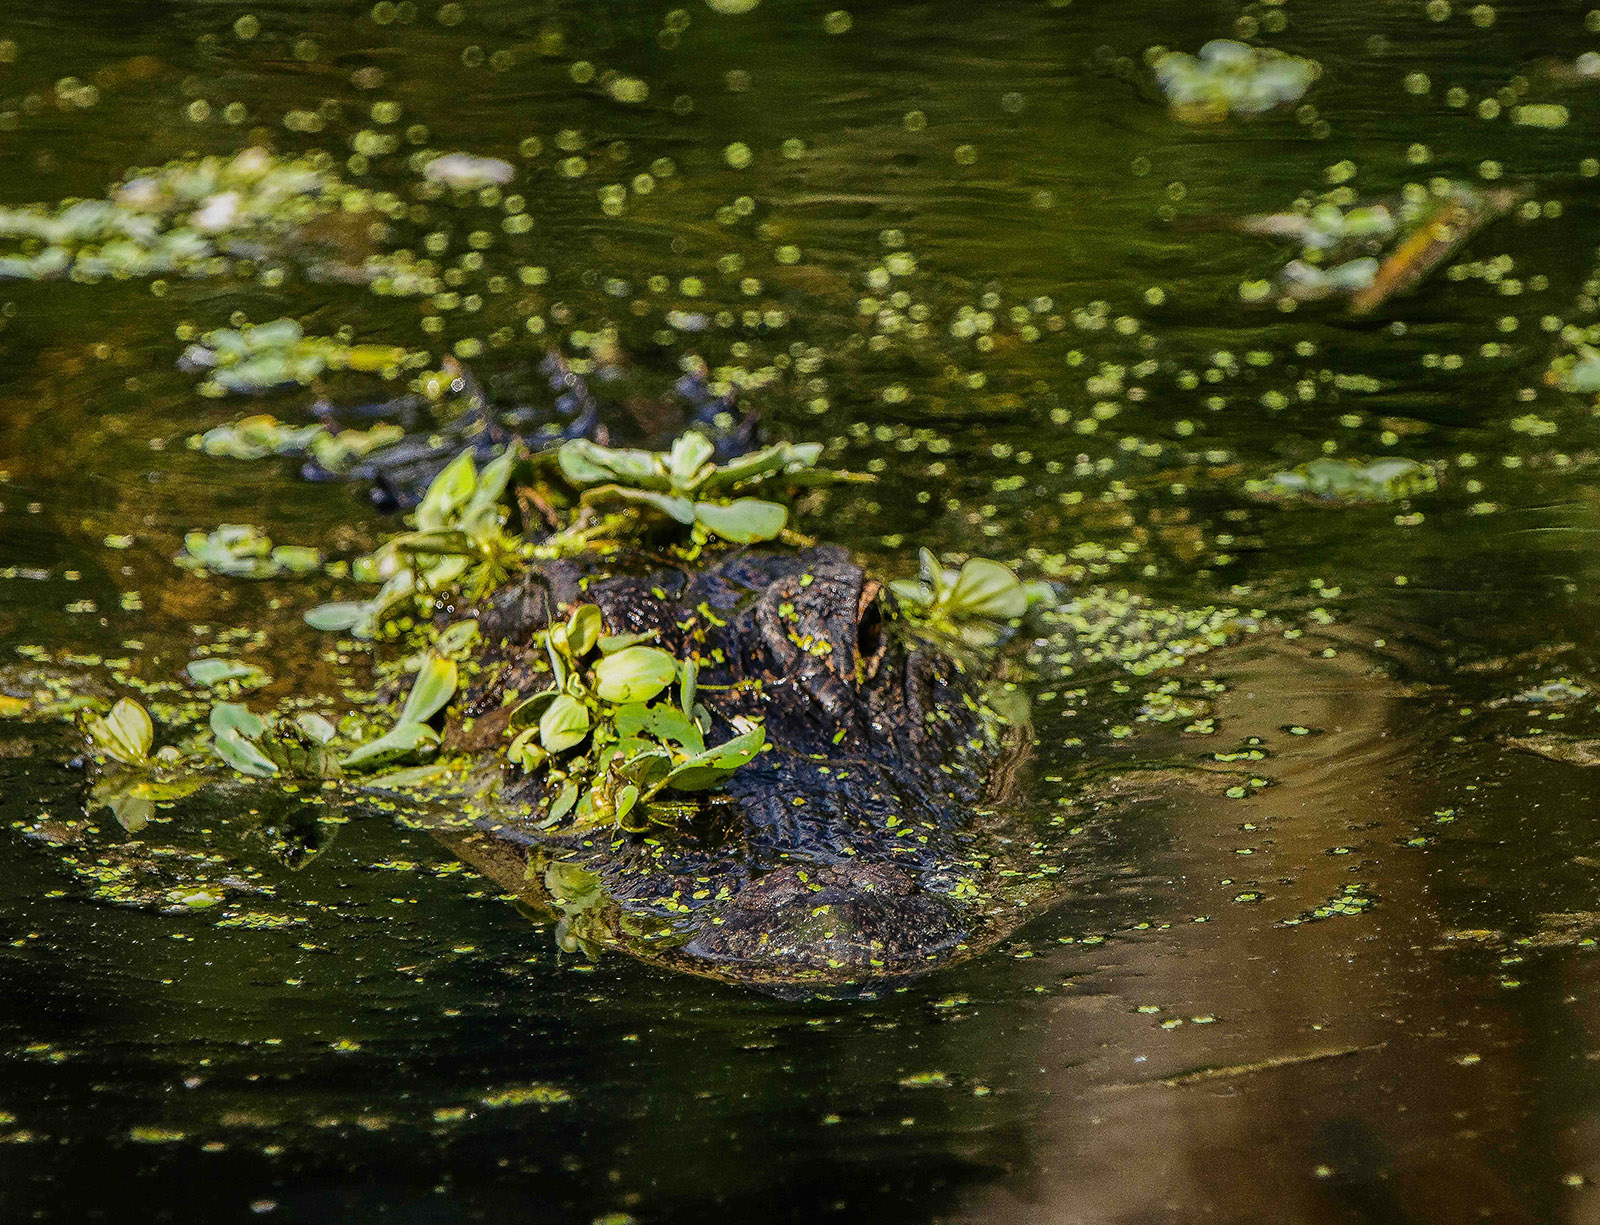 Sneaky Gator by Larry Treadwell